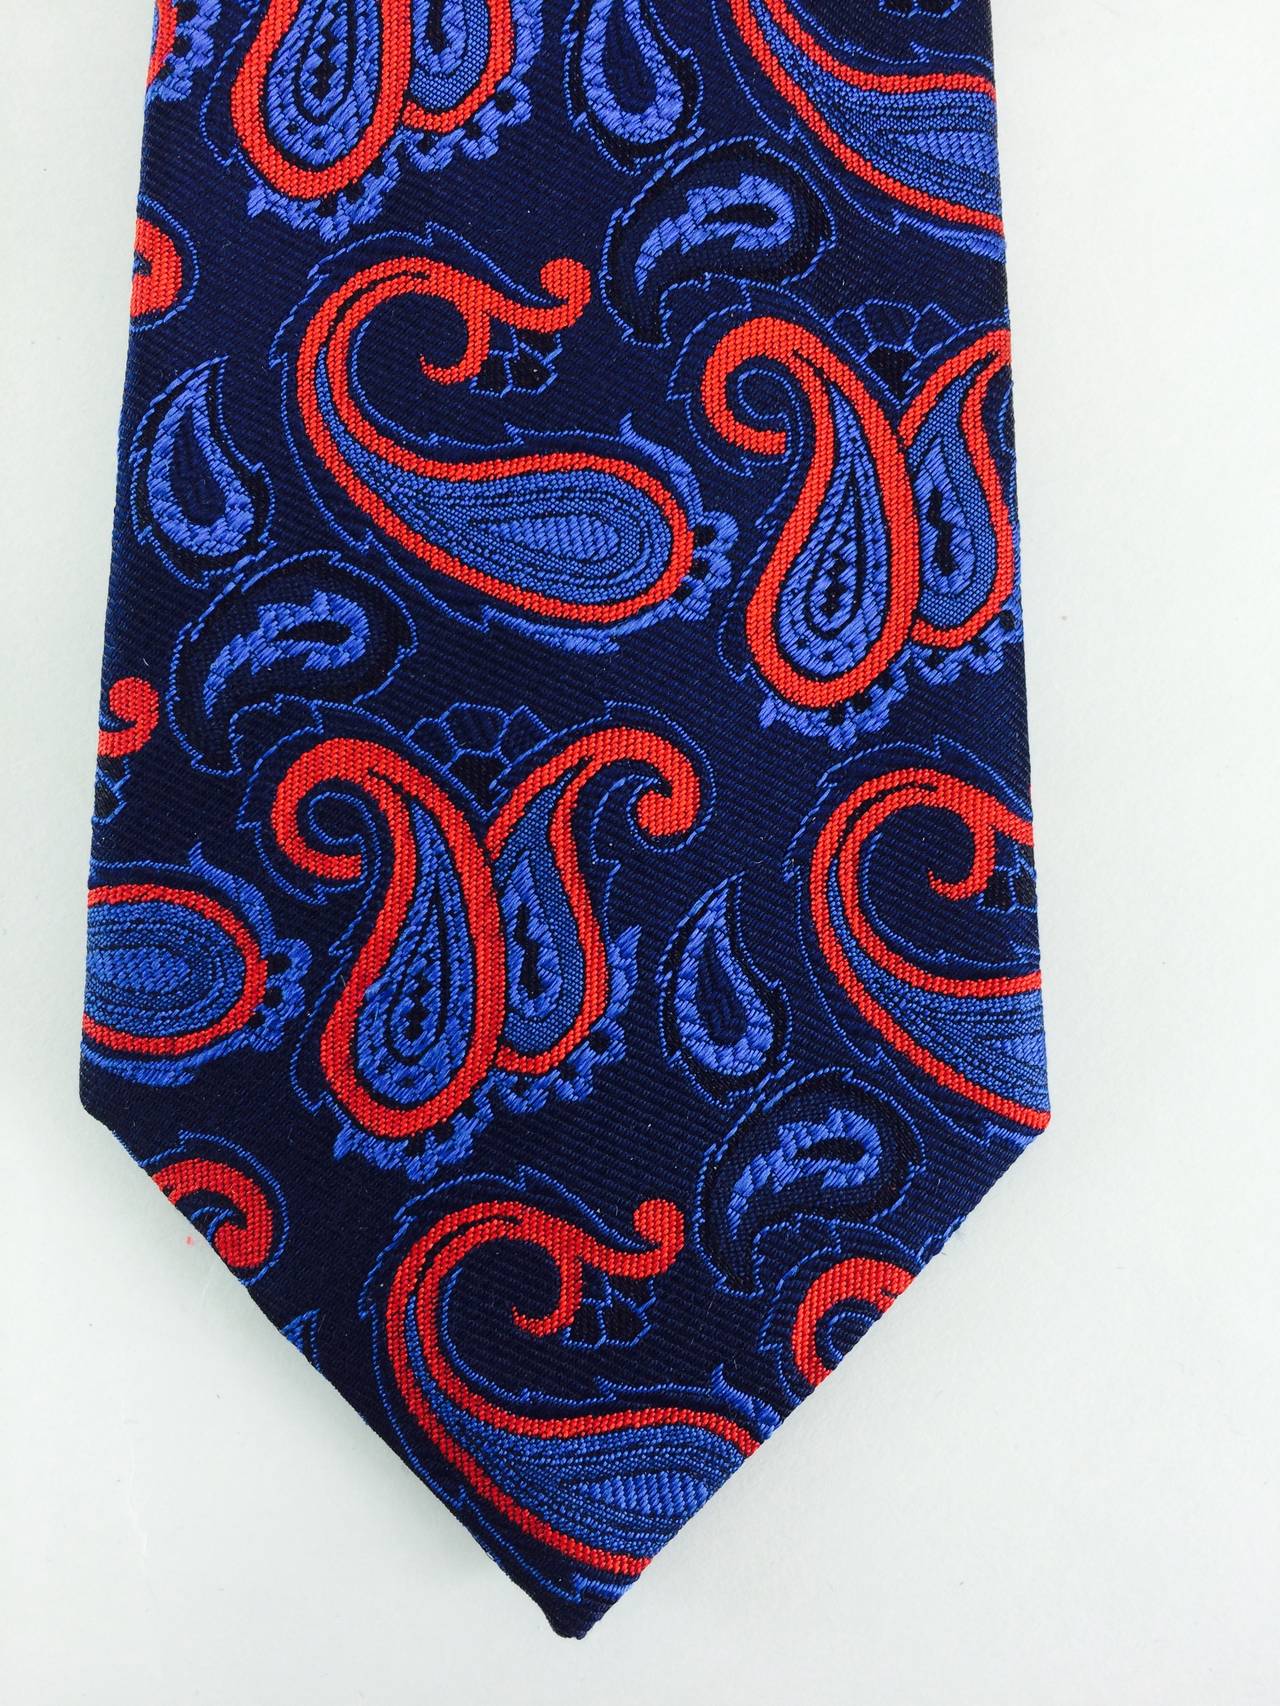 Turnbull & Asser navy blue, pale blue and red paisley silk twill tie in excellent condition.